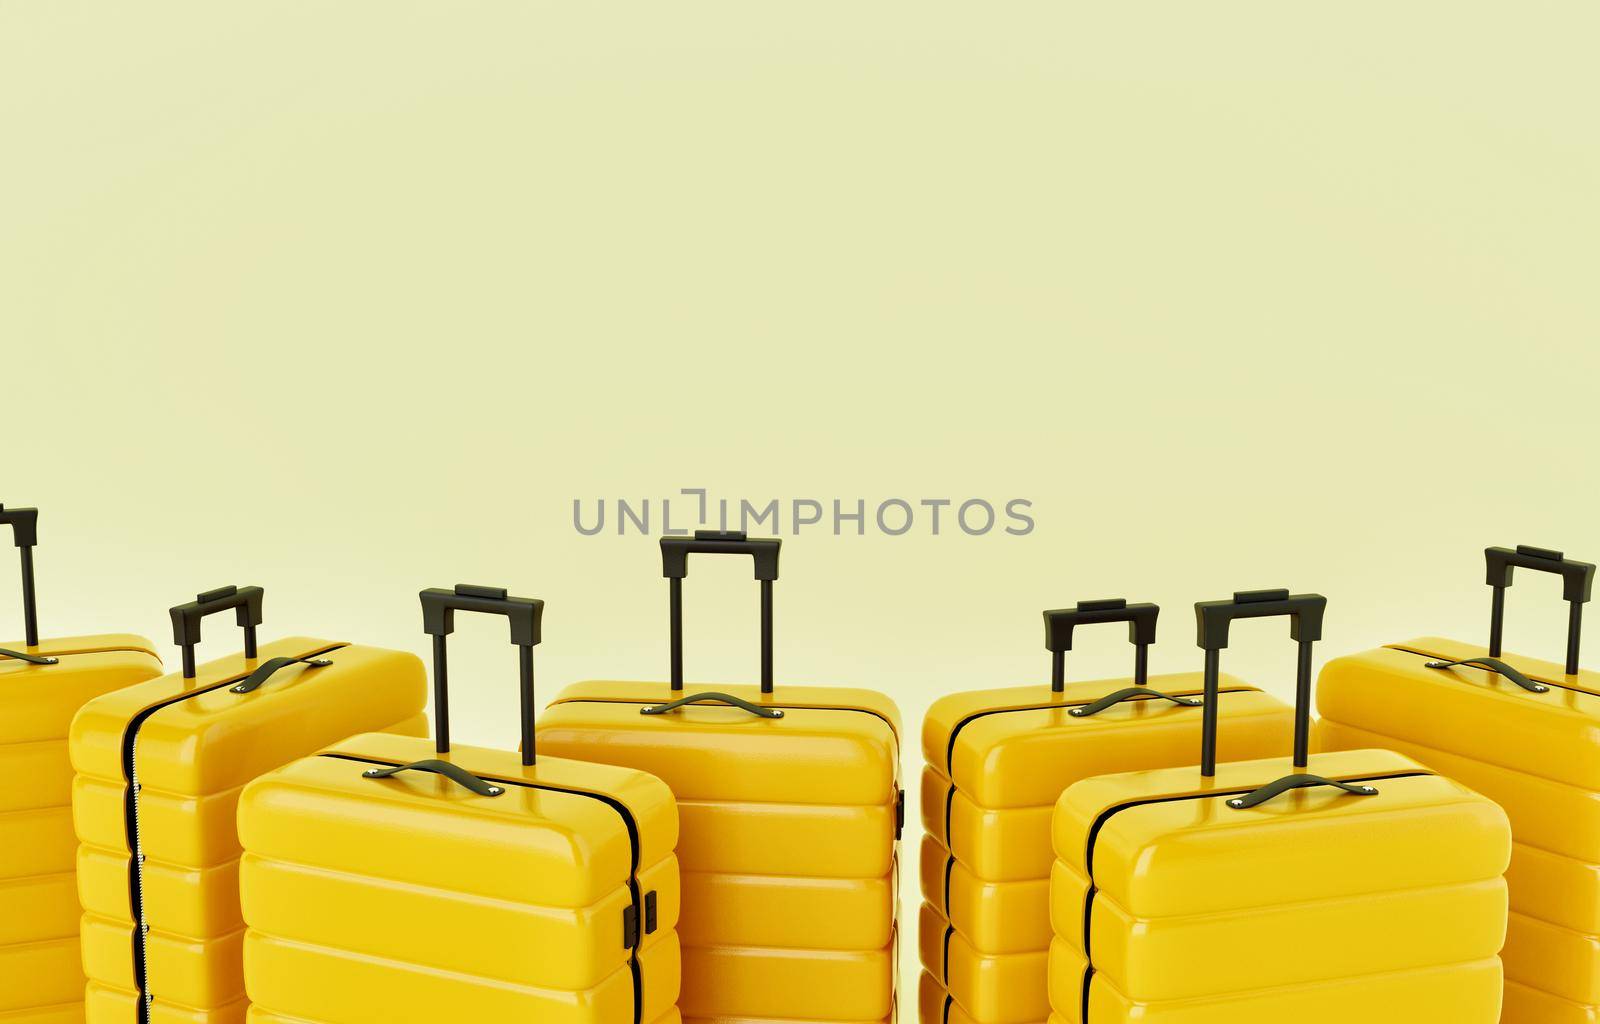 Group of yellow trolley suitcases on isolated background. Travel object and wanderlust concept. 3D illustration rendering by MiniStocker